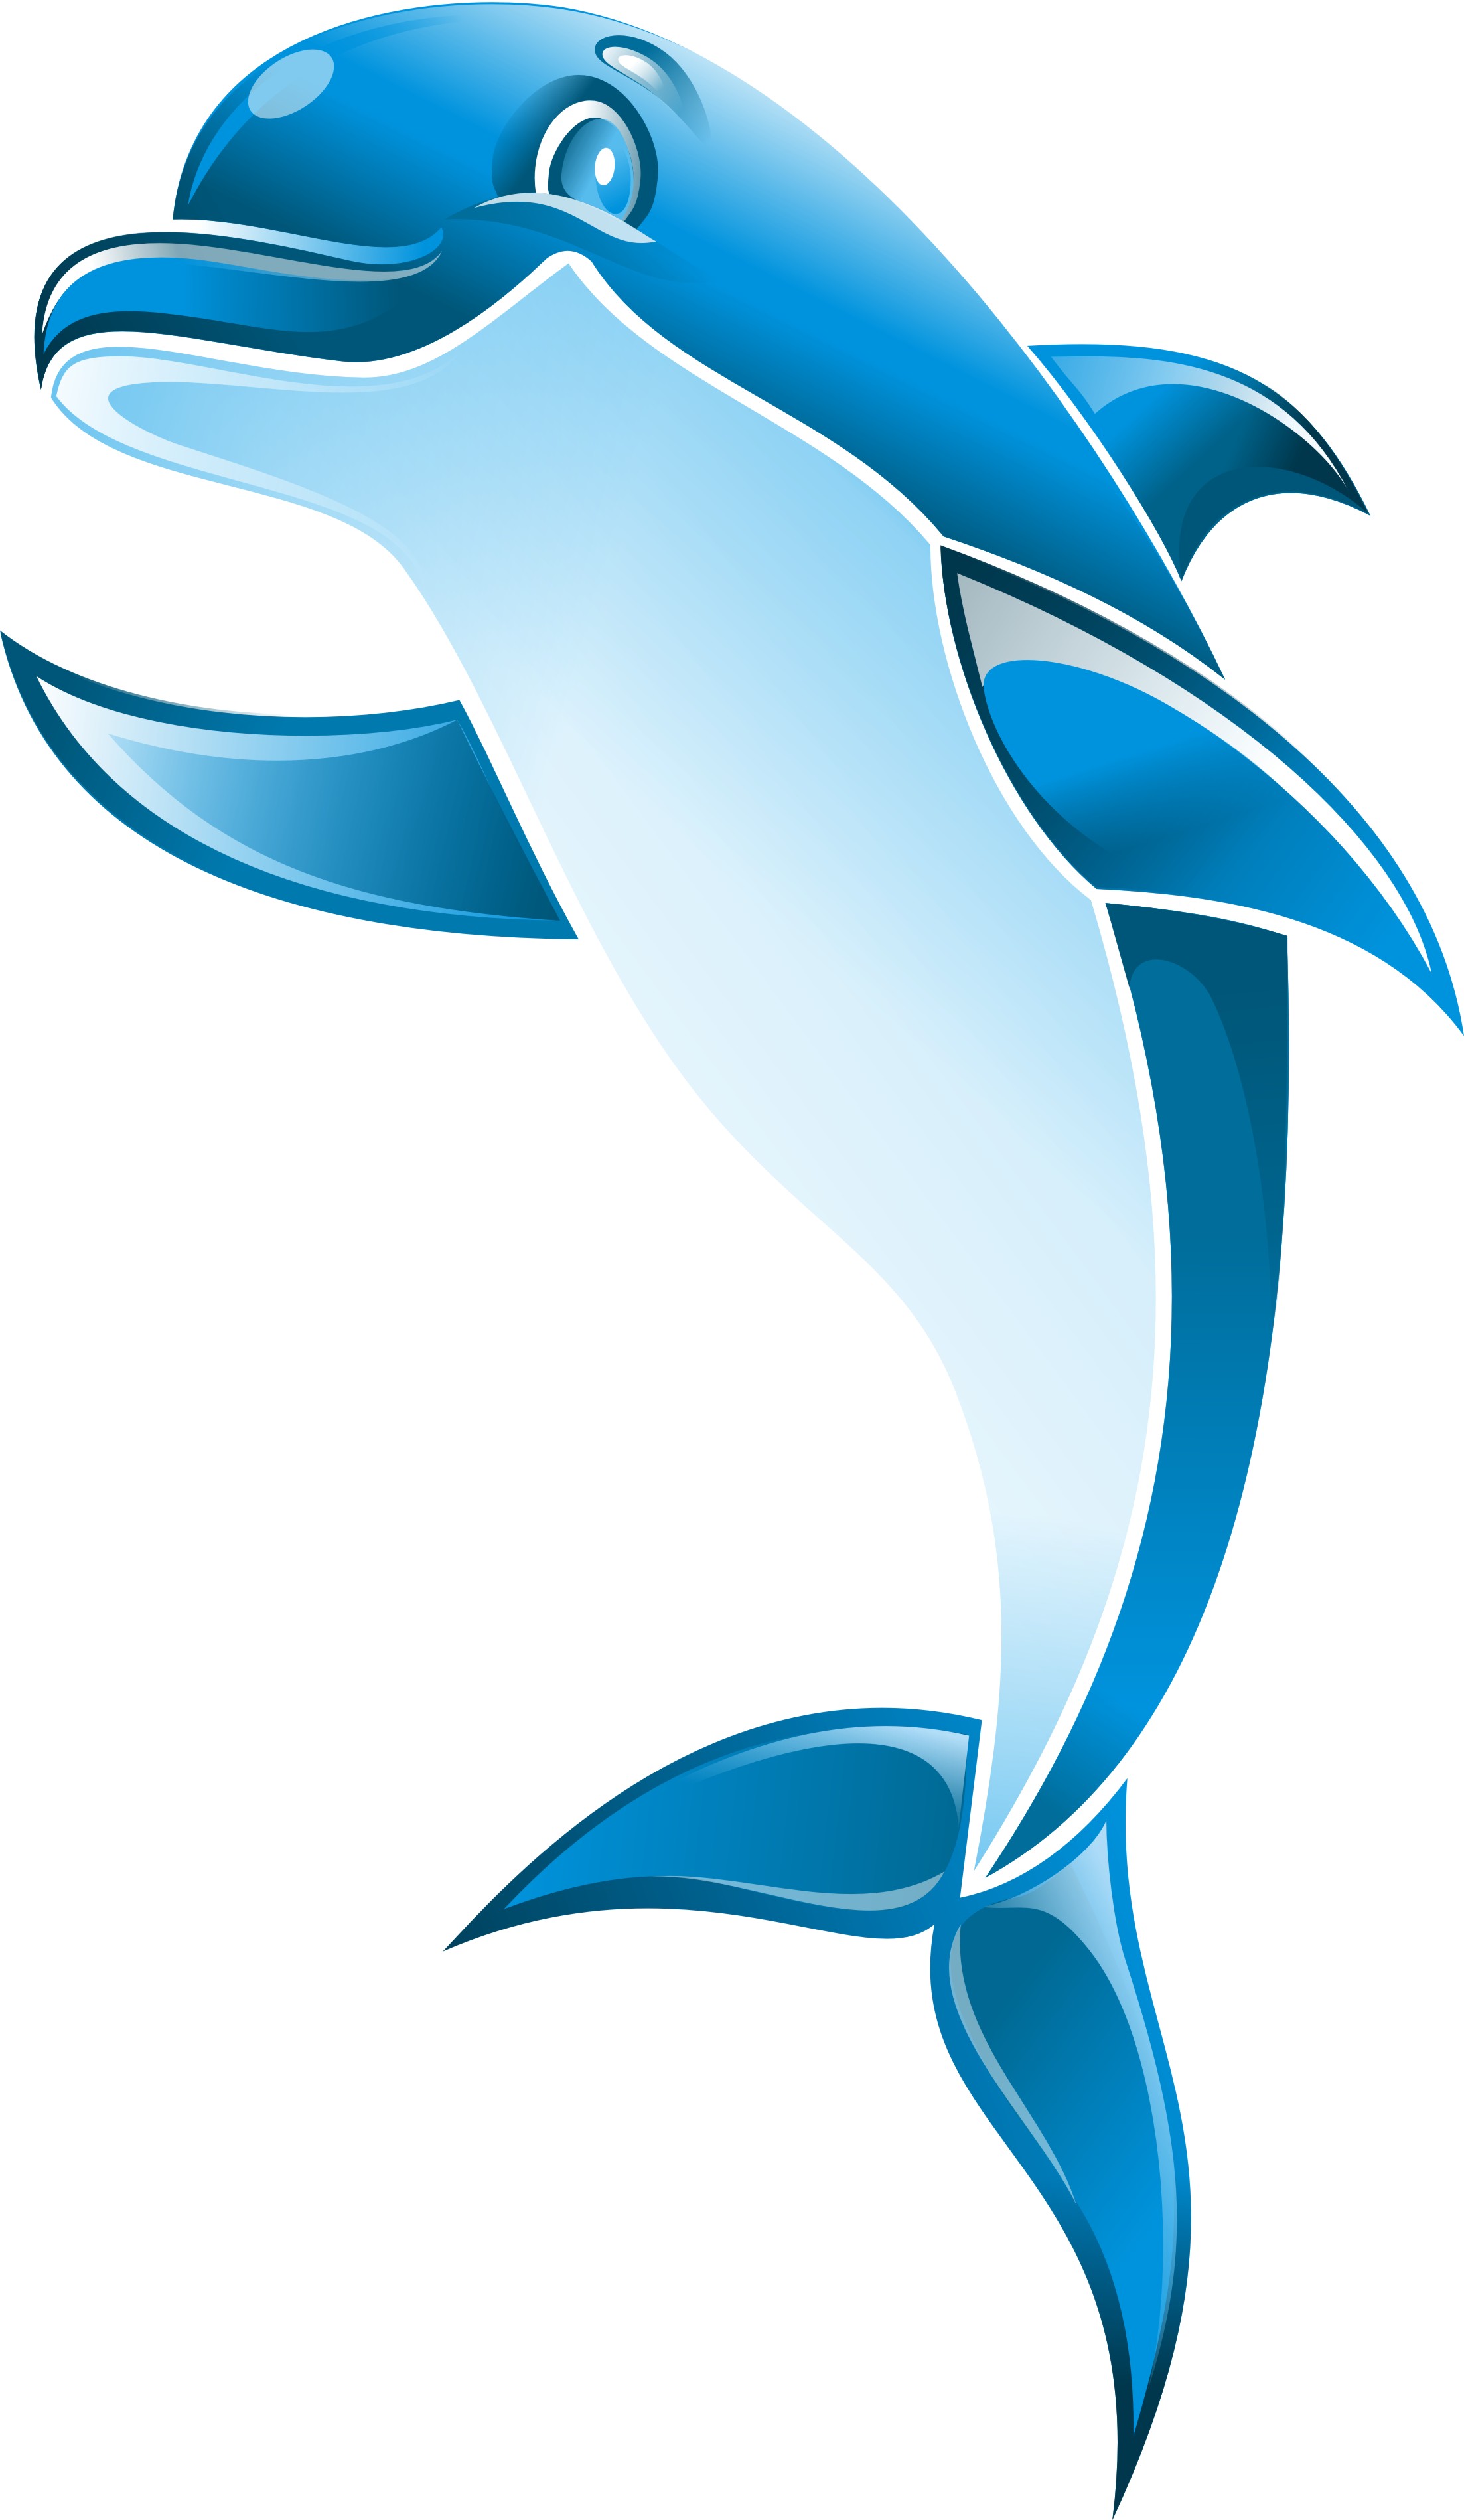 Dolphin Cartoon Images - ClipArt Best